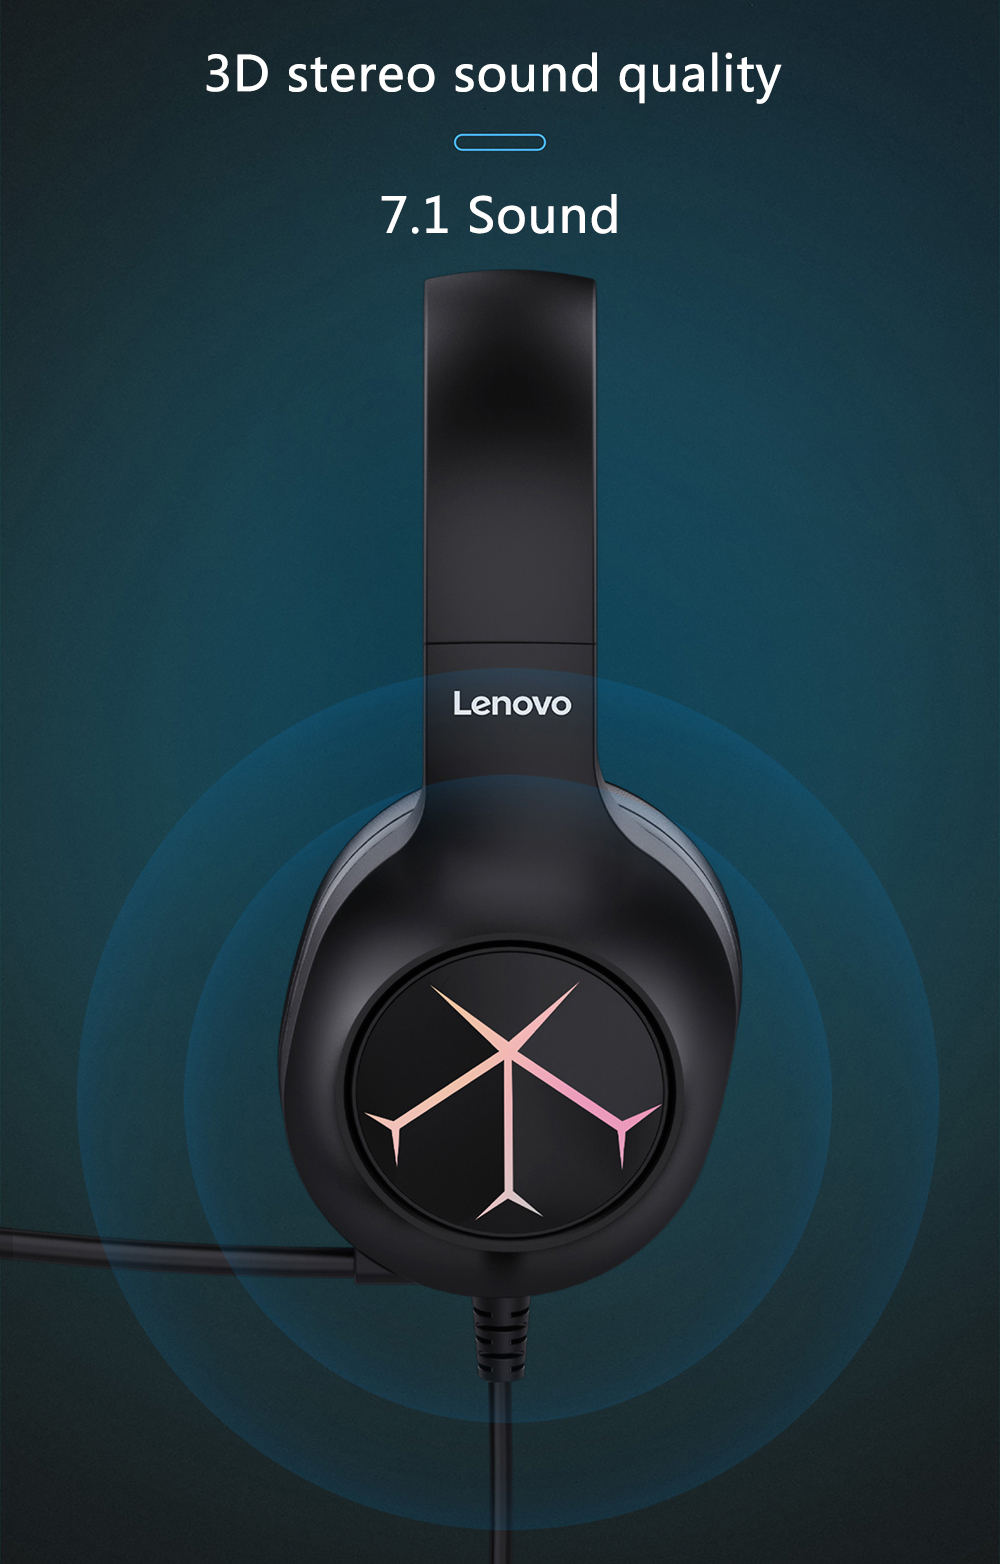 Lenovo-G60-Wired-Headset-71-Stereo-Blue-Light-Over-Ear-Gaming-Headphone-with-Mic-Noise-Canceling-USB-1896835-8